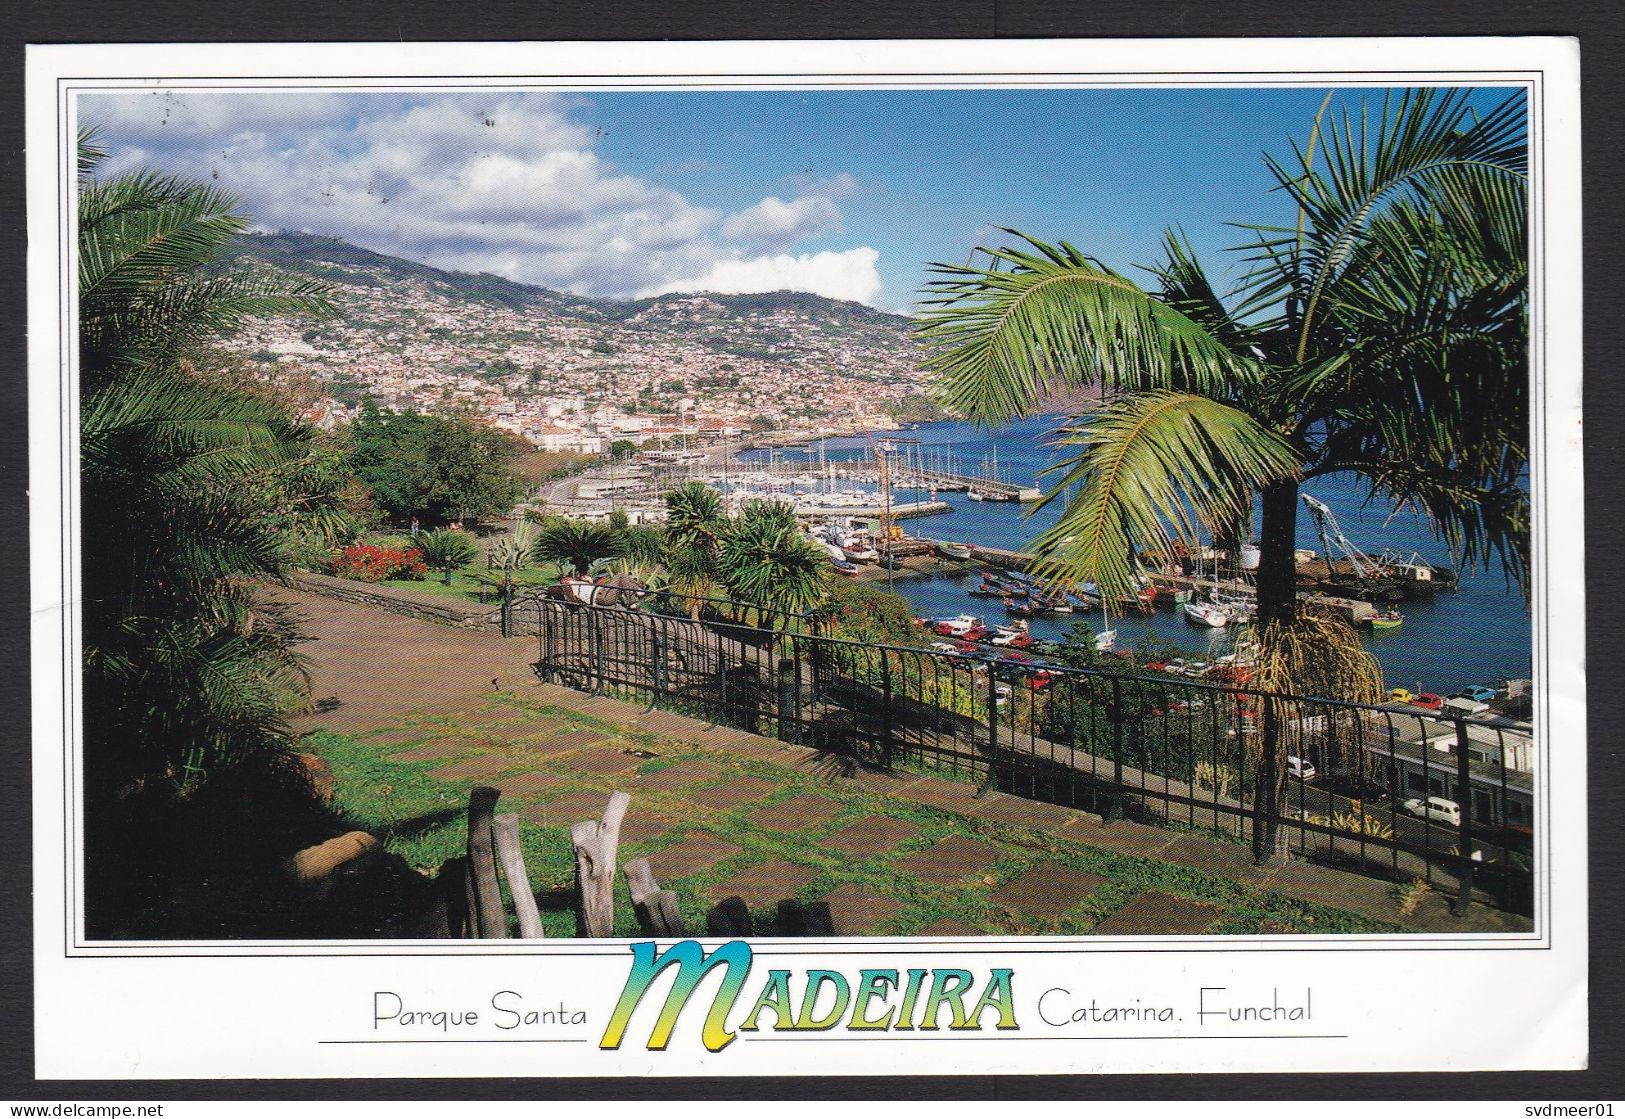 Portugal: Picture Postcard To Germany, 2002, 2 Stamps, Bird, Coin, Money, Card: Funchal Madeira (minor Crease) - Covers & Documents